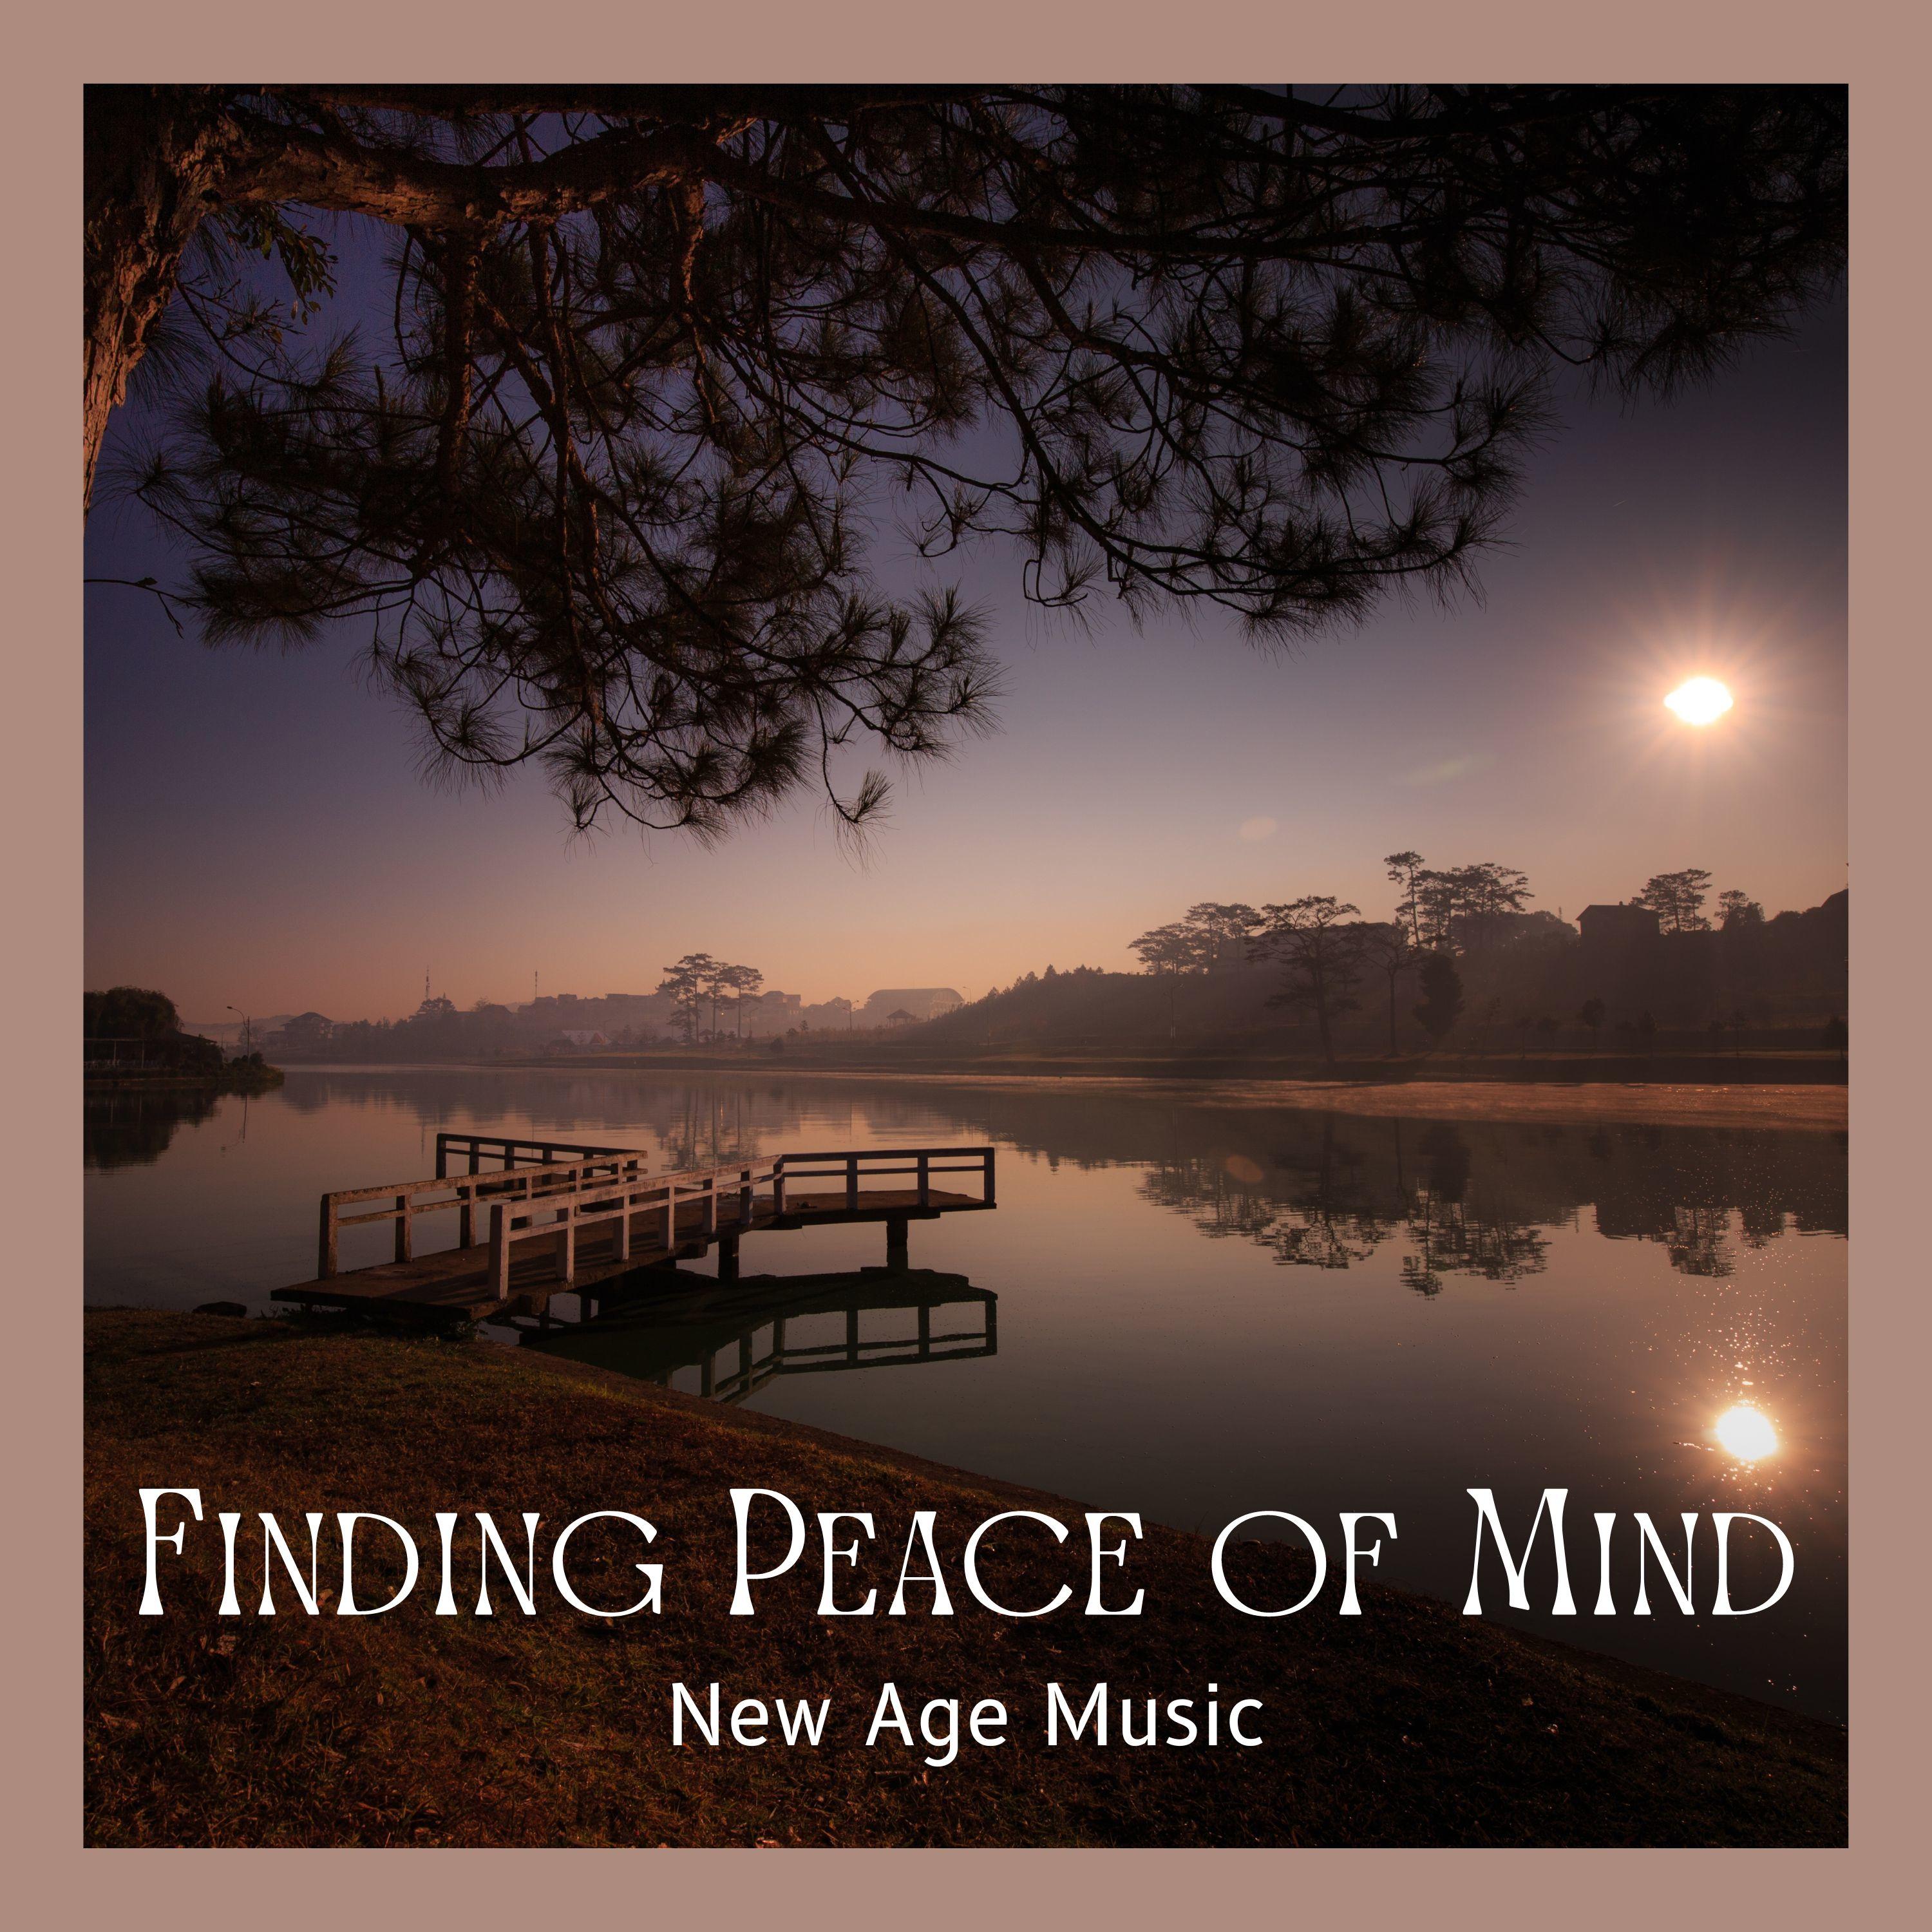 New age music - Soothing Dreams